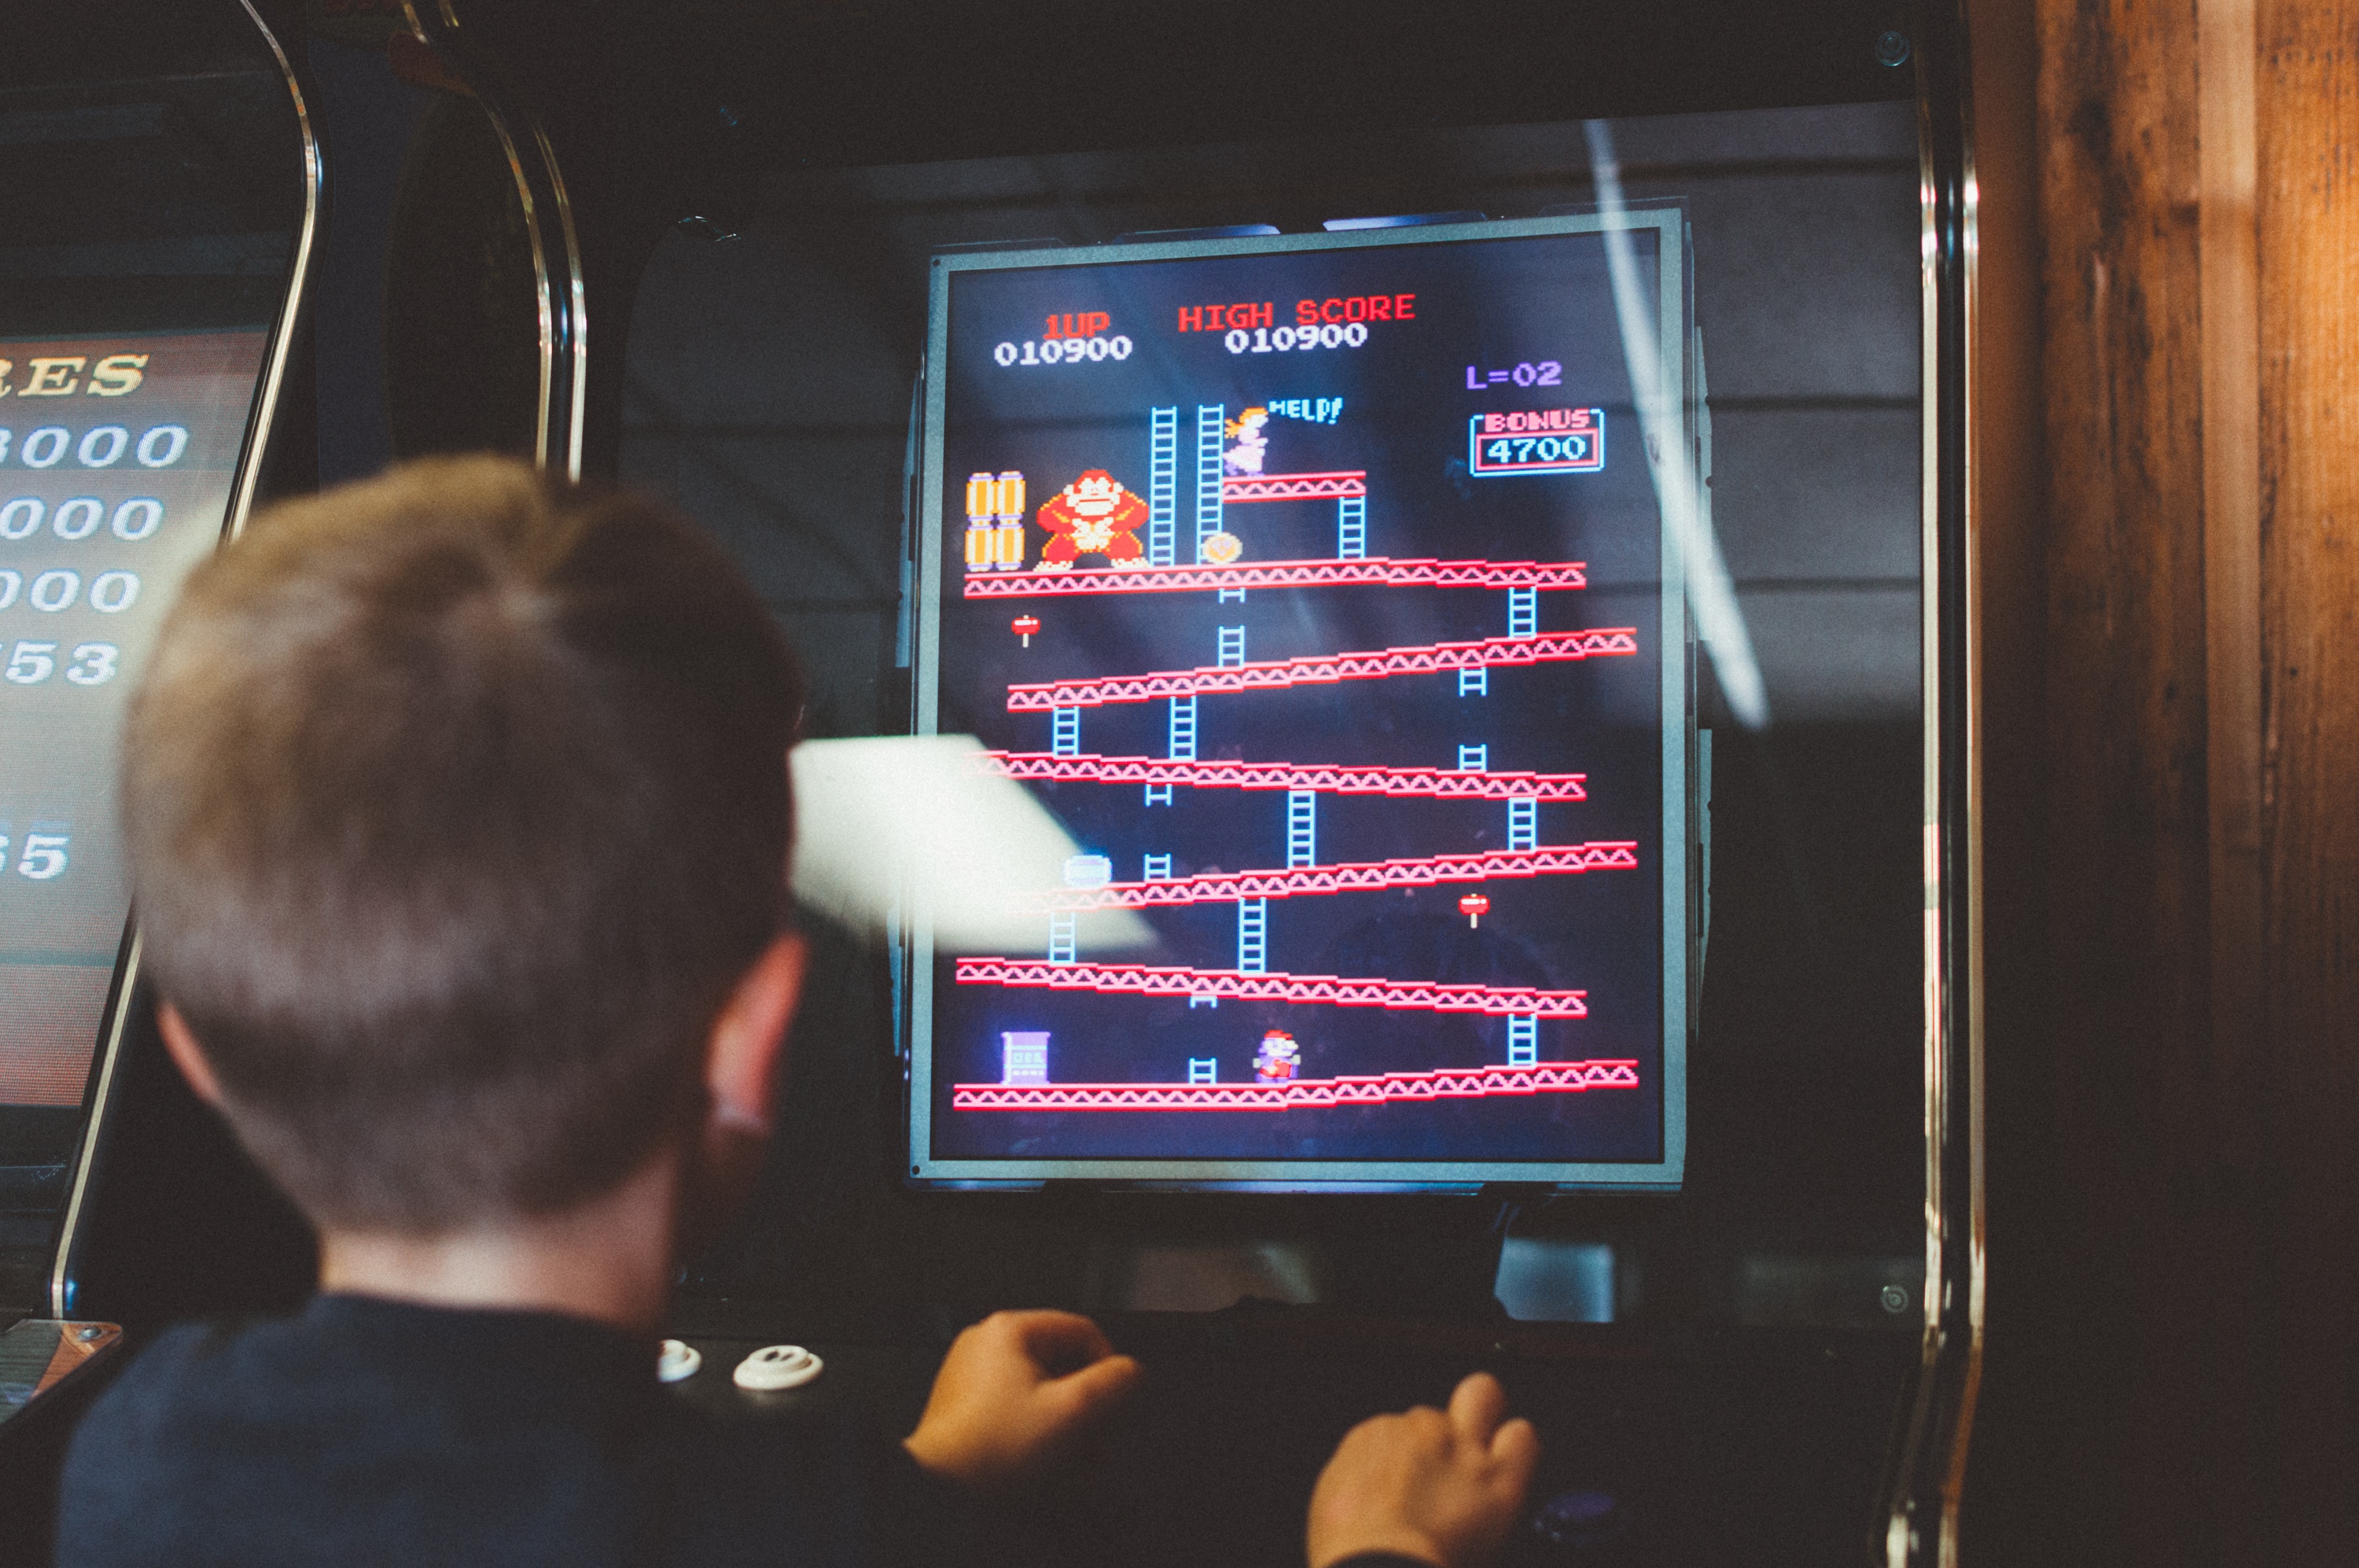 Classic video games are coming to Dundee. (library photo)